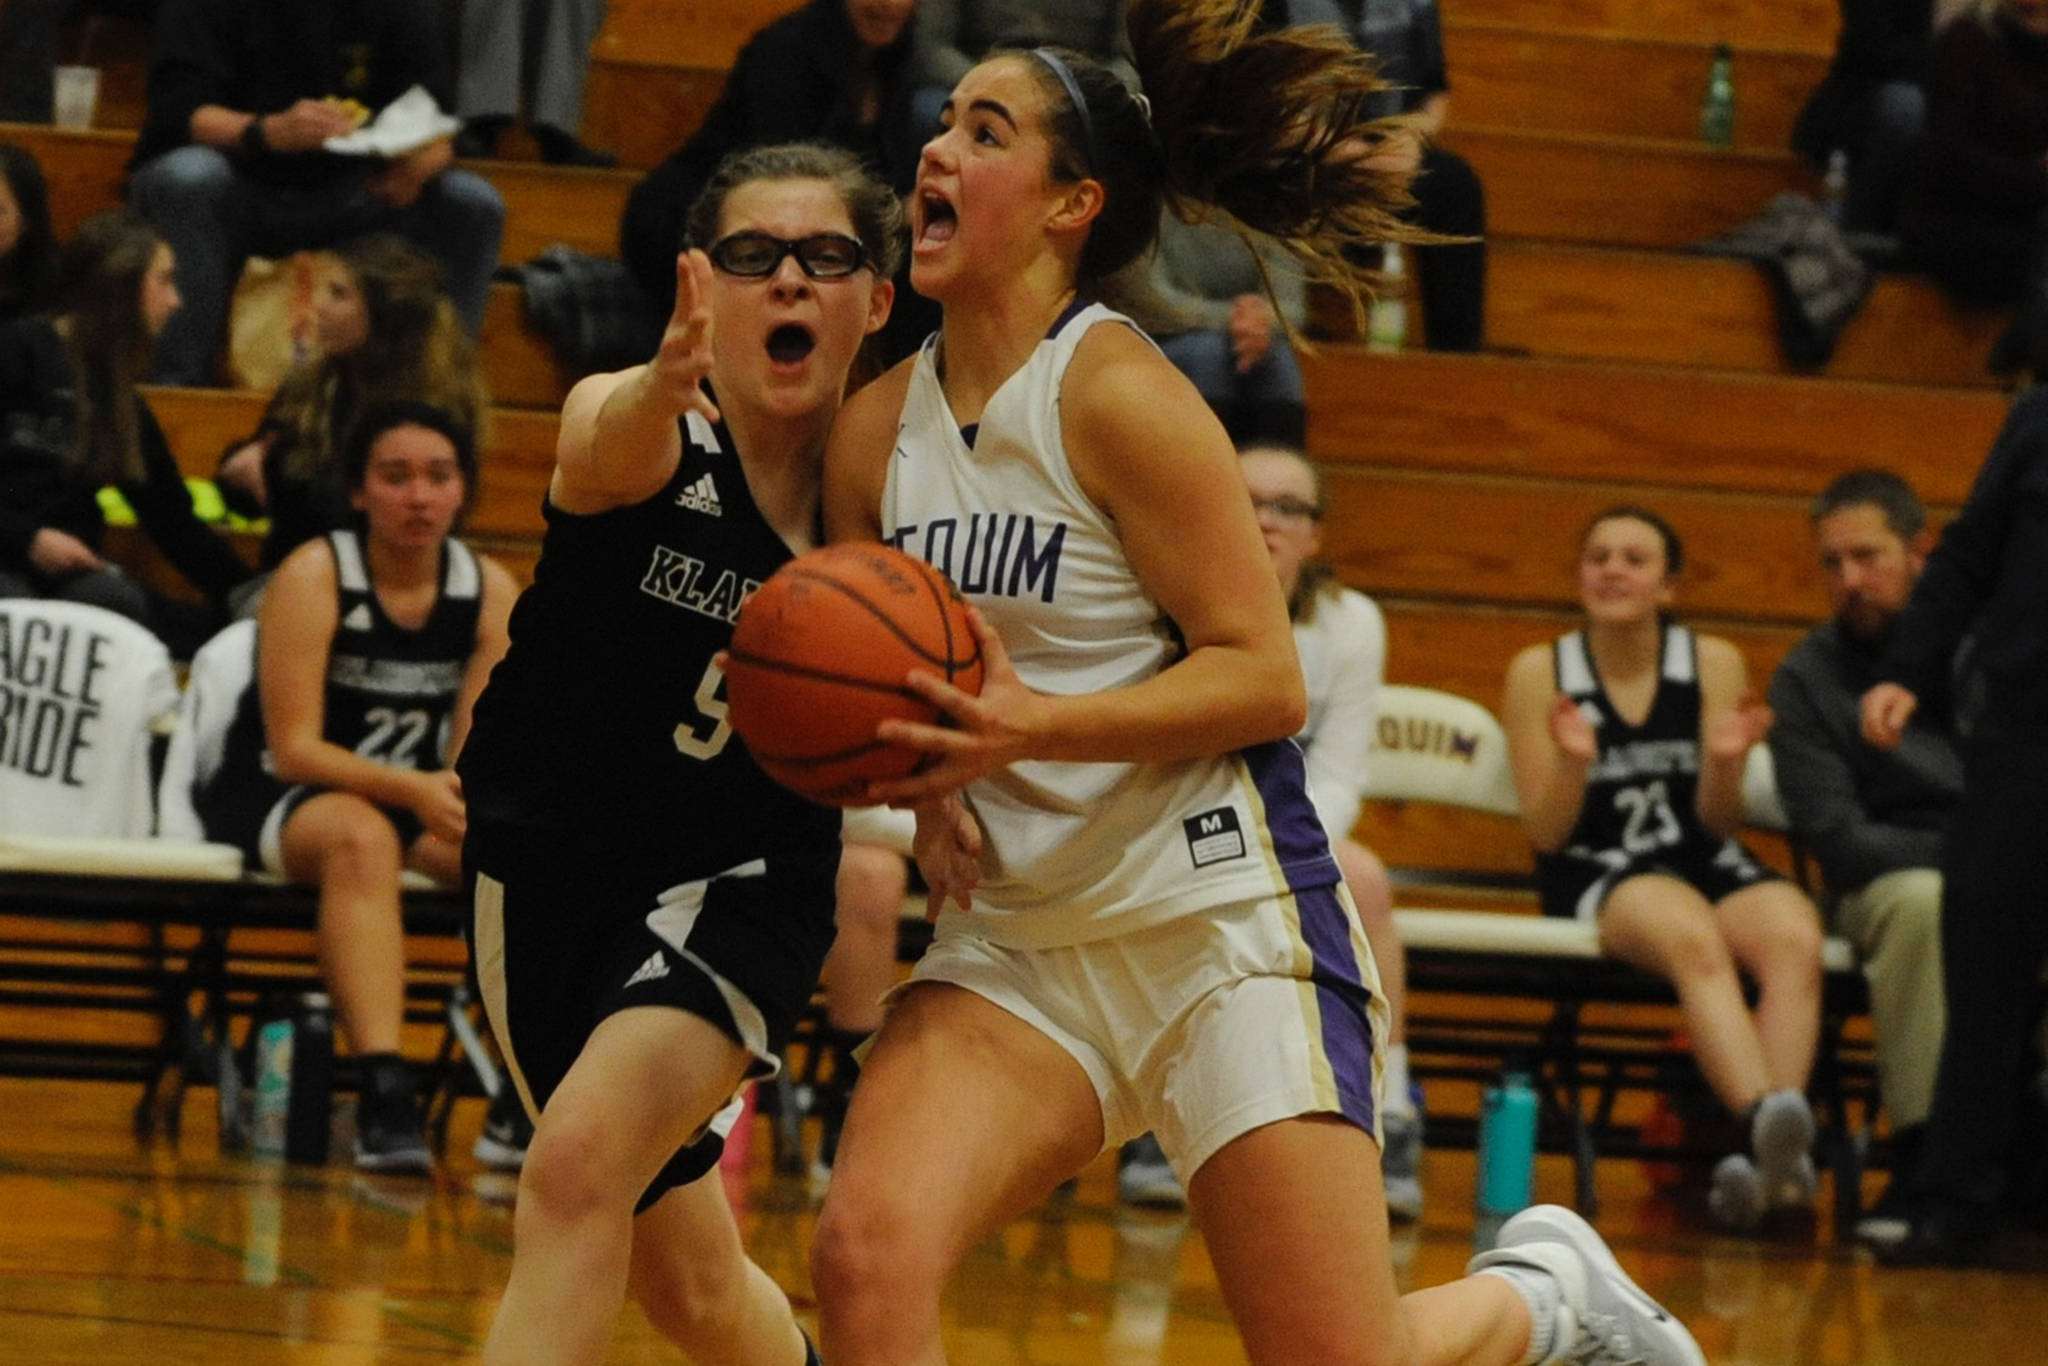 Hope Glasser, pictured playing against the Klahowya Eagles on Dec. 2, scored a season-high 25 points against the Bremerton Knights on Dec. 17, along with 9 rebounds and 9 steals. Sequim Gazette file photo by Conor Dowley